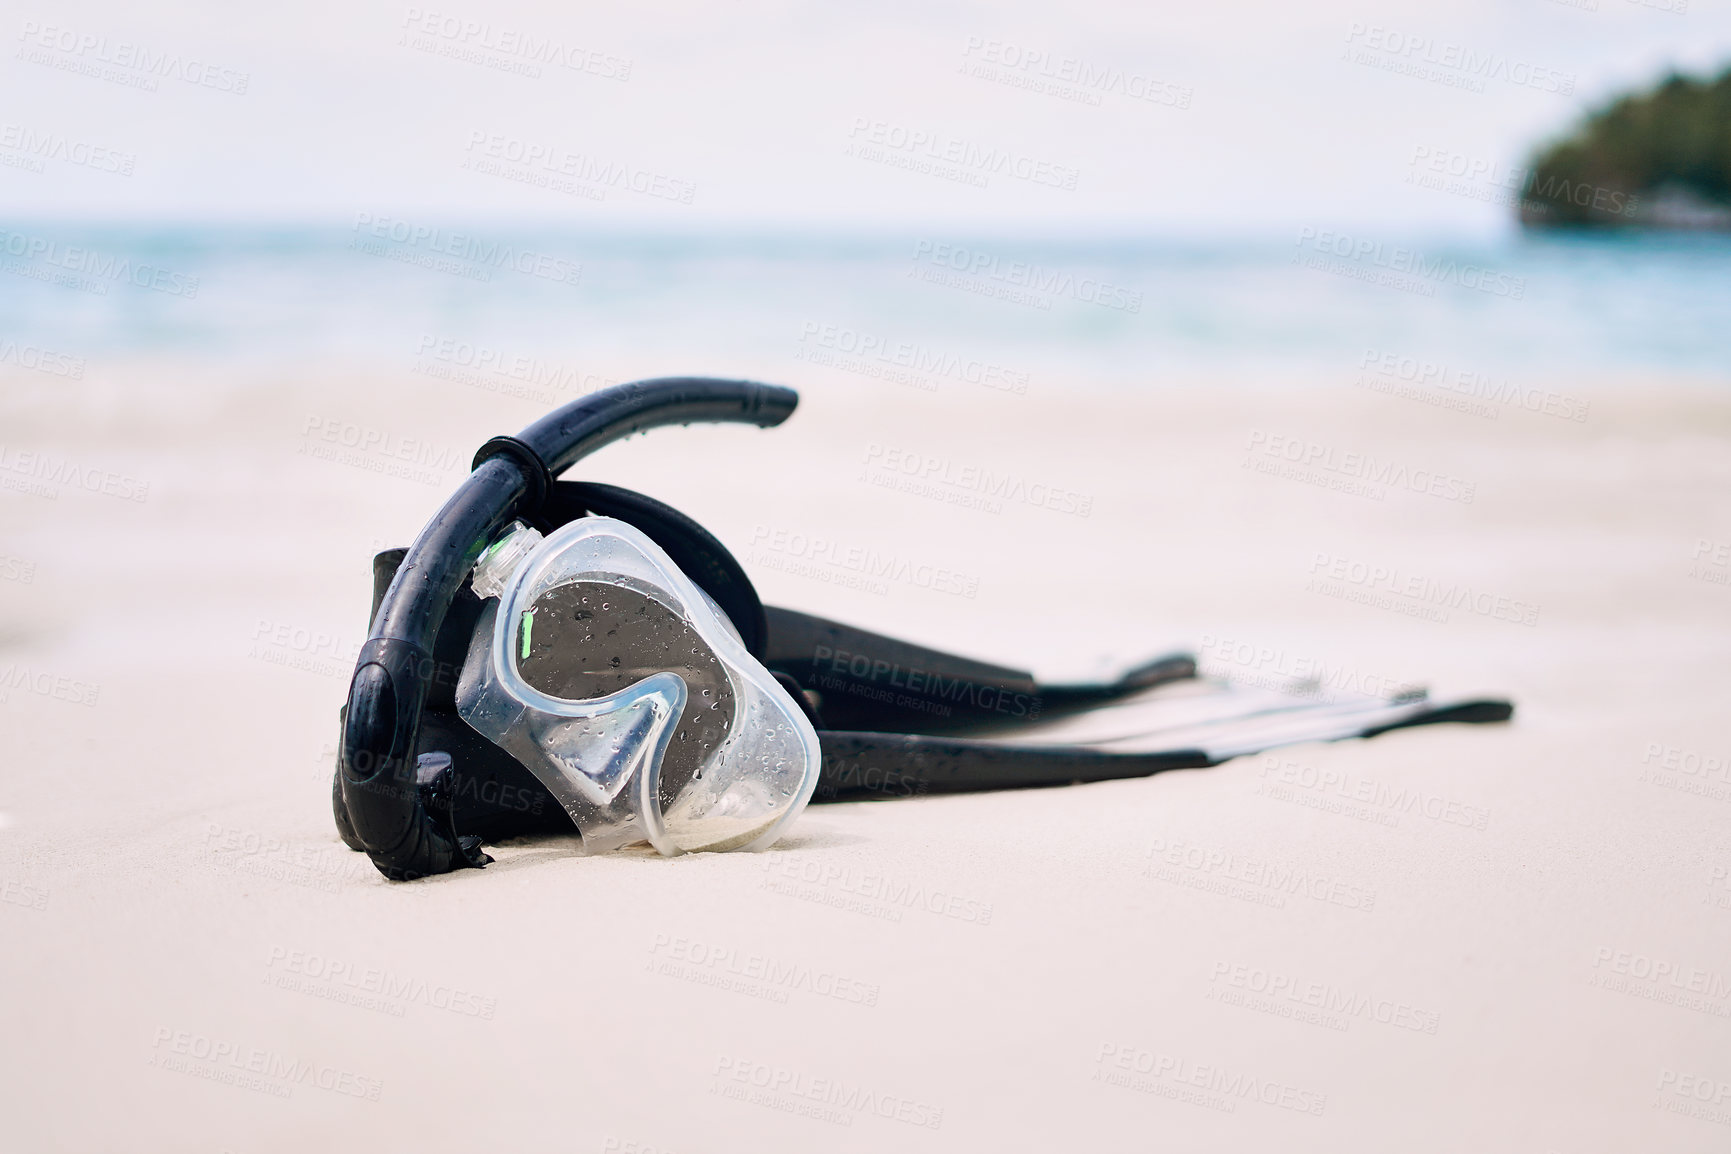 Buy stock photo Still life shot of snorkeling gear on a beach in Raja Ampat, Indonesia